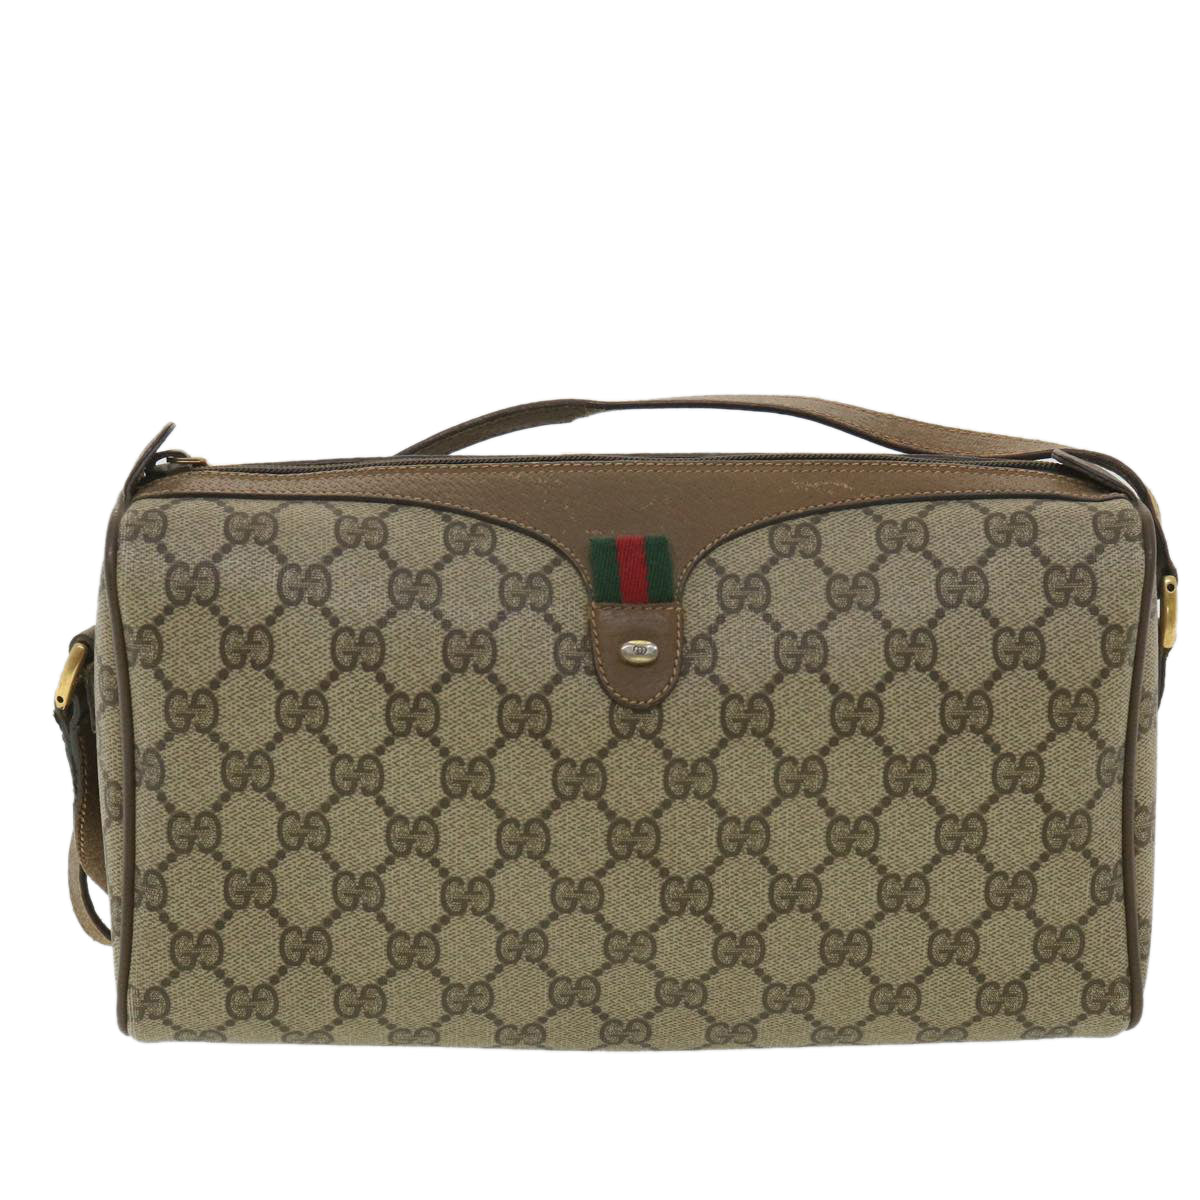 GUCCI GG Canvas Web Sherry Line Shoulder Bag Beige Red 89.02.012 Auth 36784